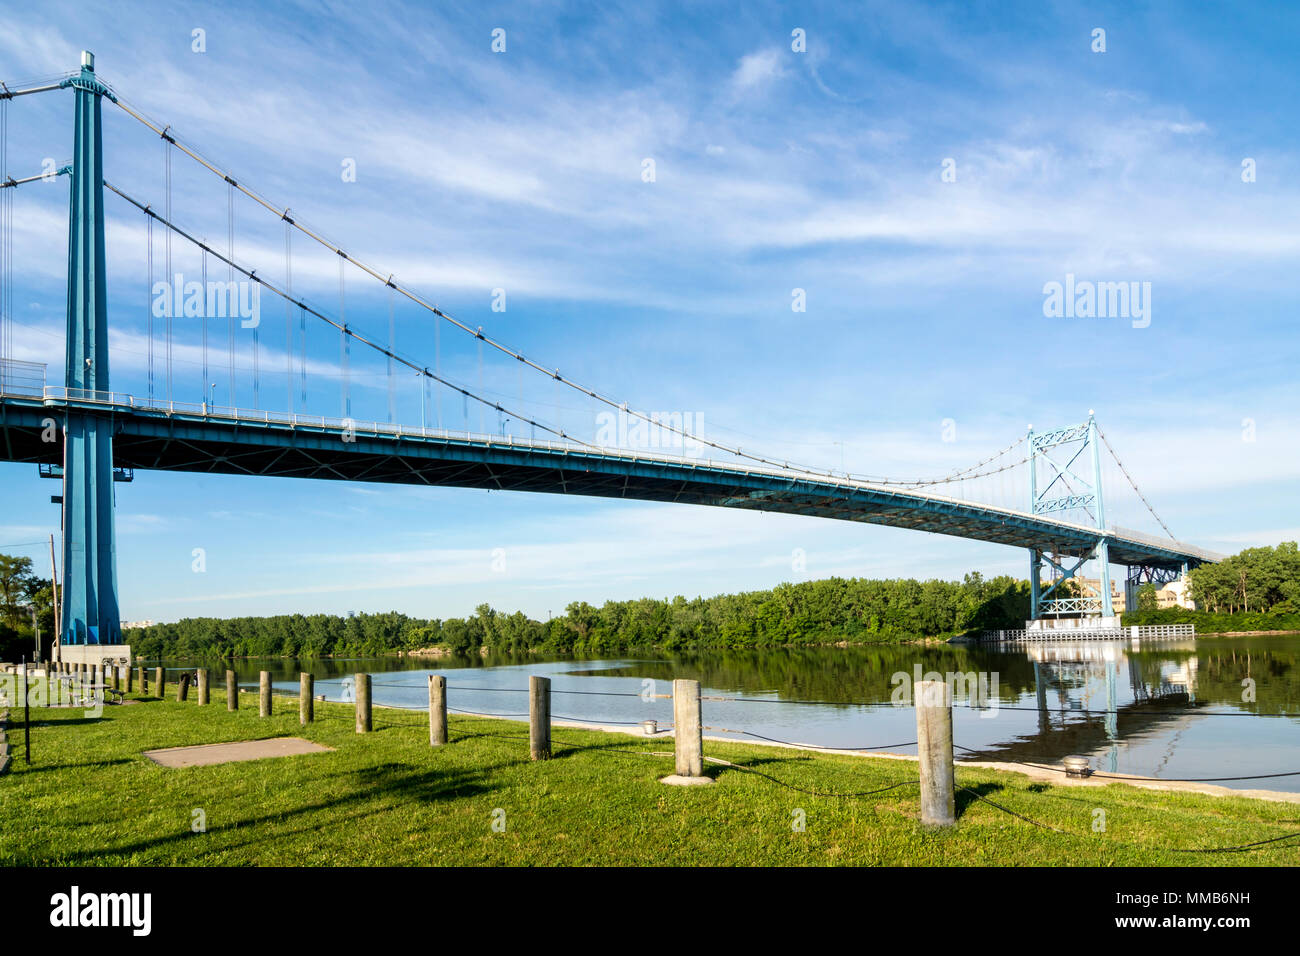 A panoramic view of downtown Toledo Ohio's Anthony Wayne Bridge or High-Level bridge that crosses the Maumee River.A beautiful blue sky with clouds. Stock Photo